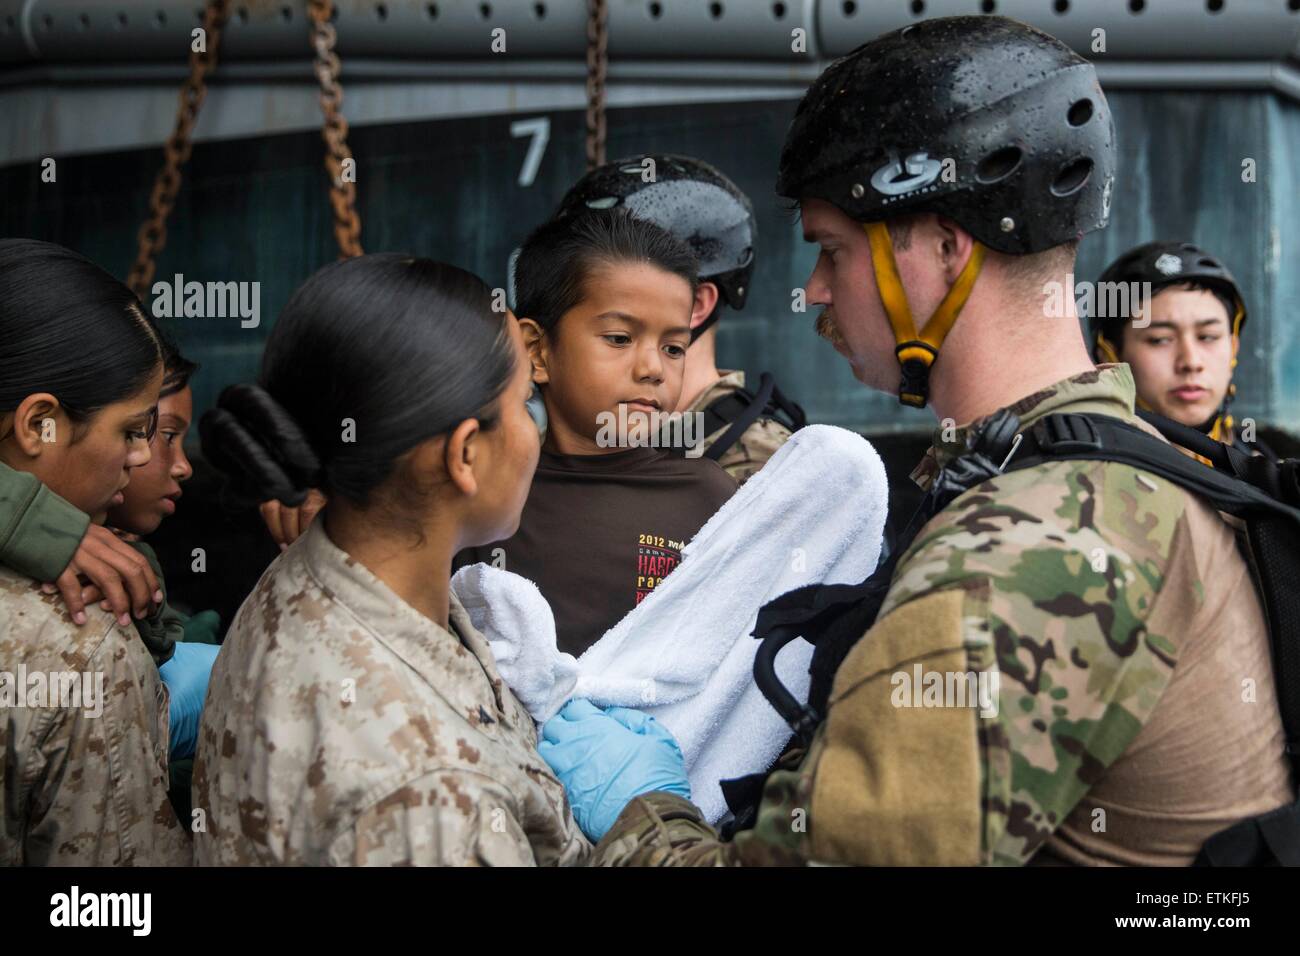 US Marines care for a young Indonesia refugee before transferring him to an Indonesian coast guard vessel from the USS Rushmore June 11, 2015 in the Pacific Ocean. The crew of the Rushmore rescued the group of refugees stranded between the Indonesian islands of Kalimantan and Sulawesi. Stock Photo